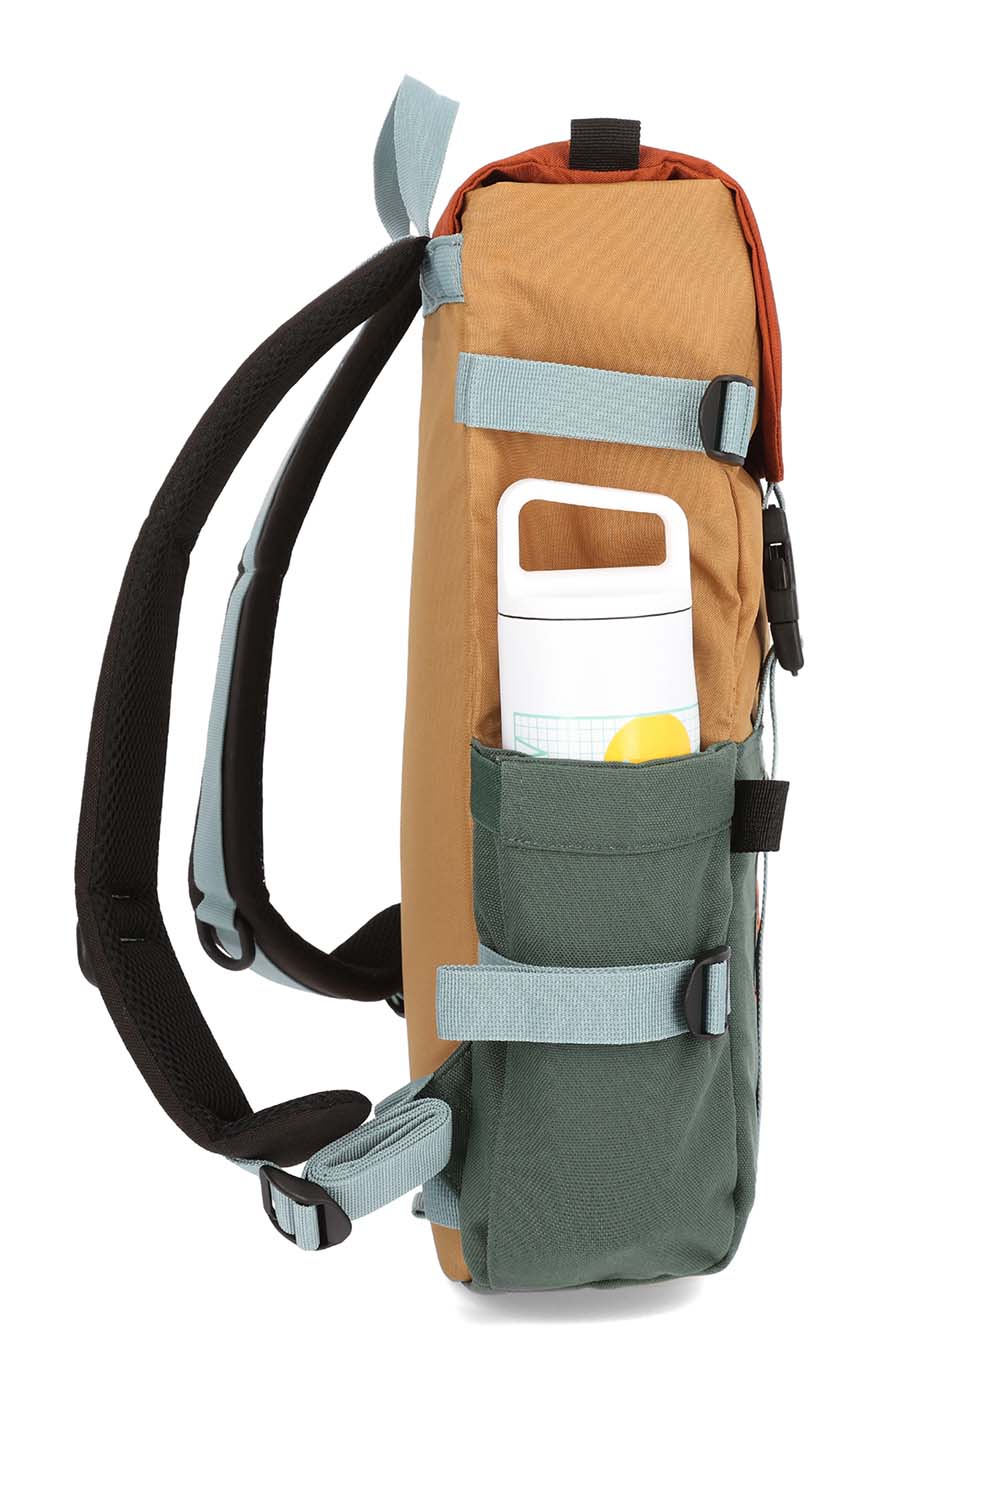 Topo - Rover Pack Classic - Forest/Khaki - Side